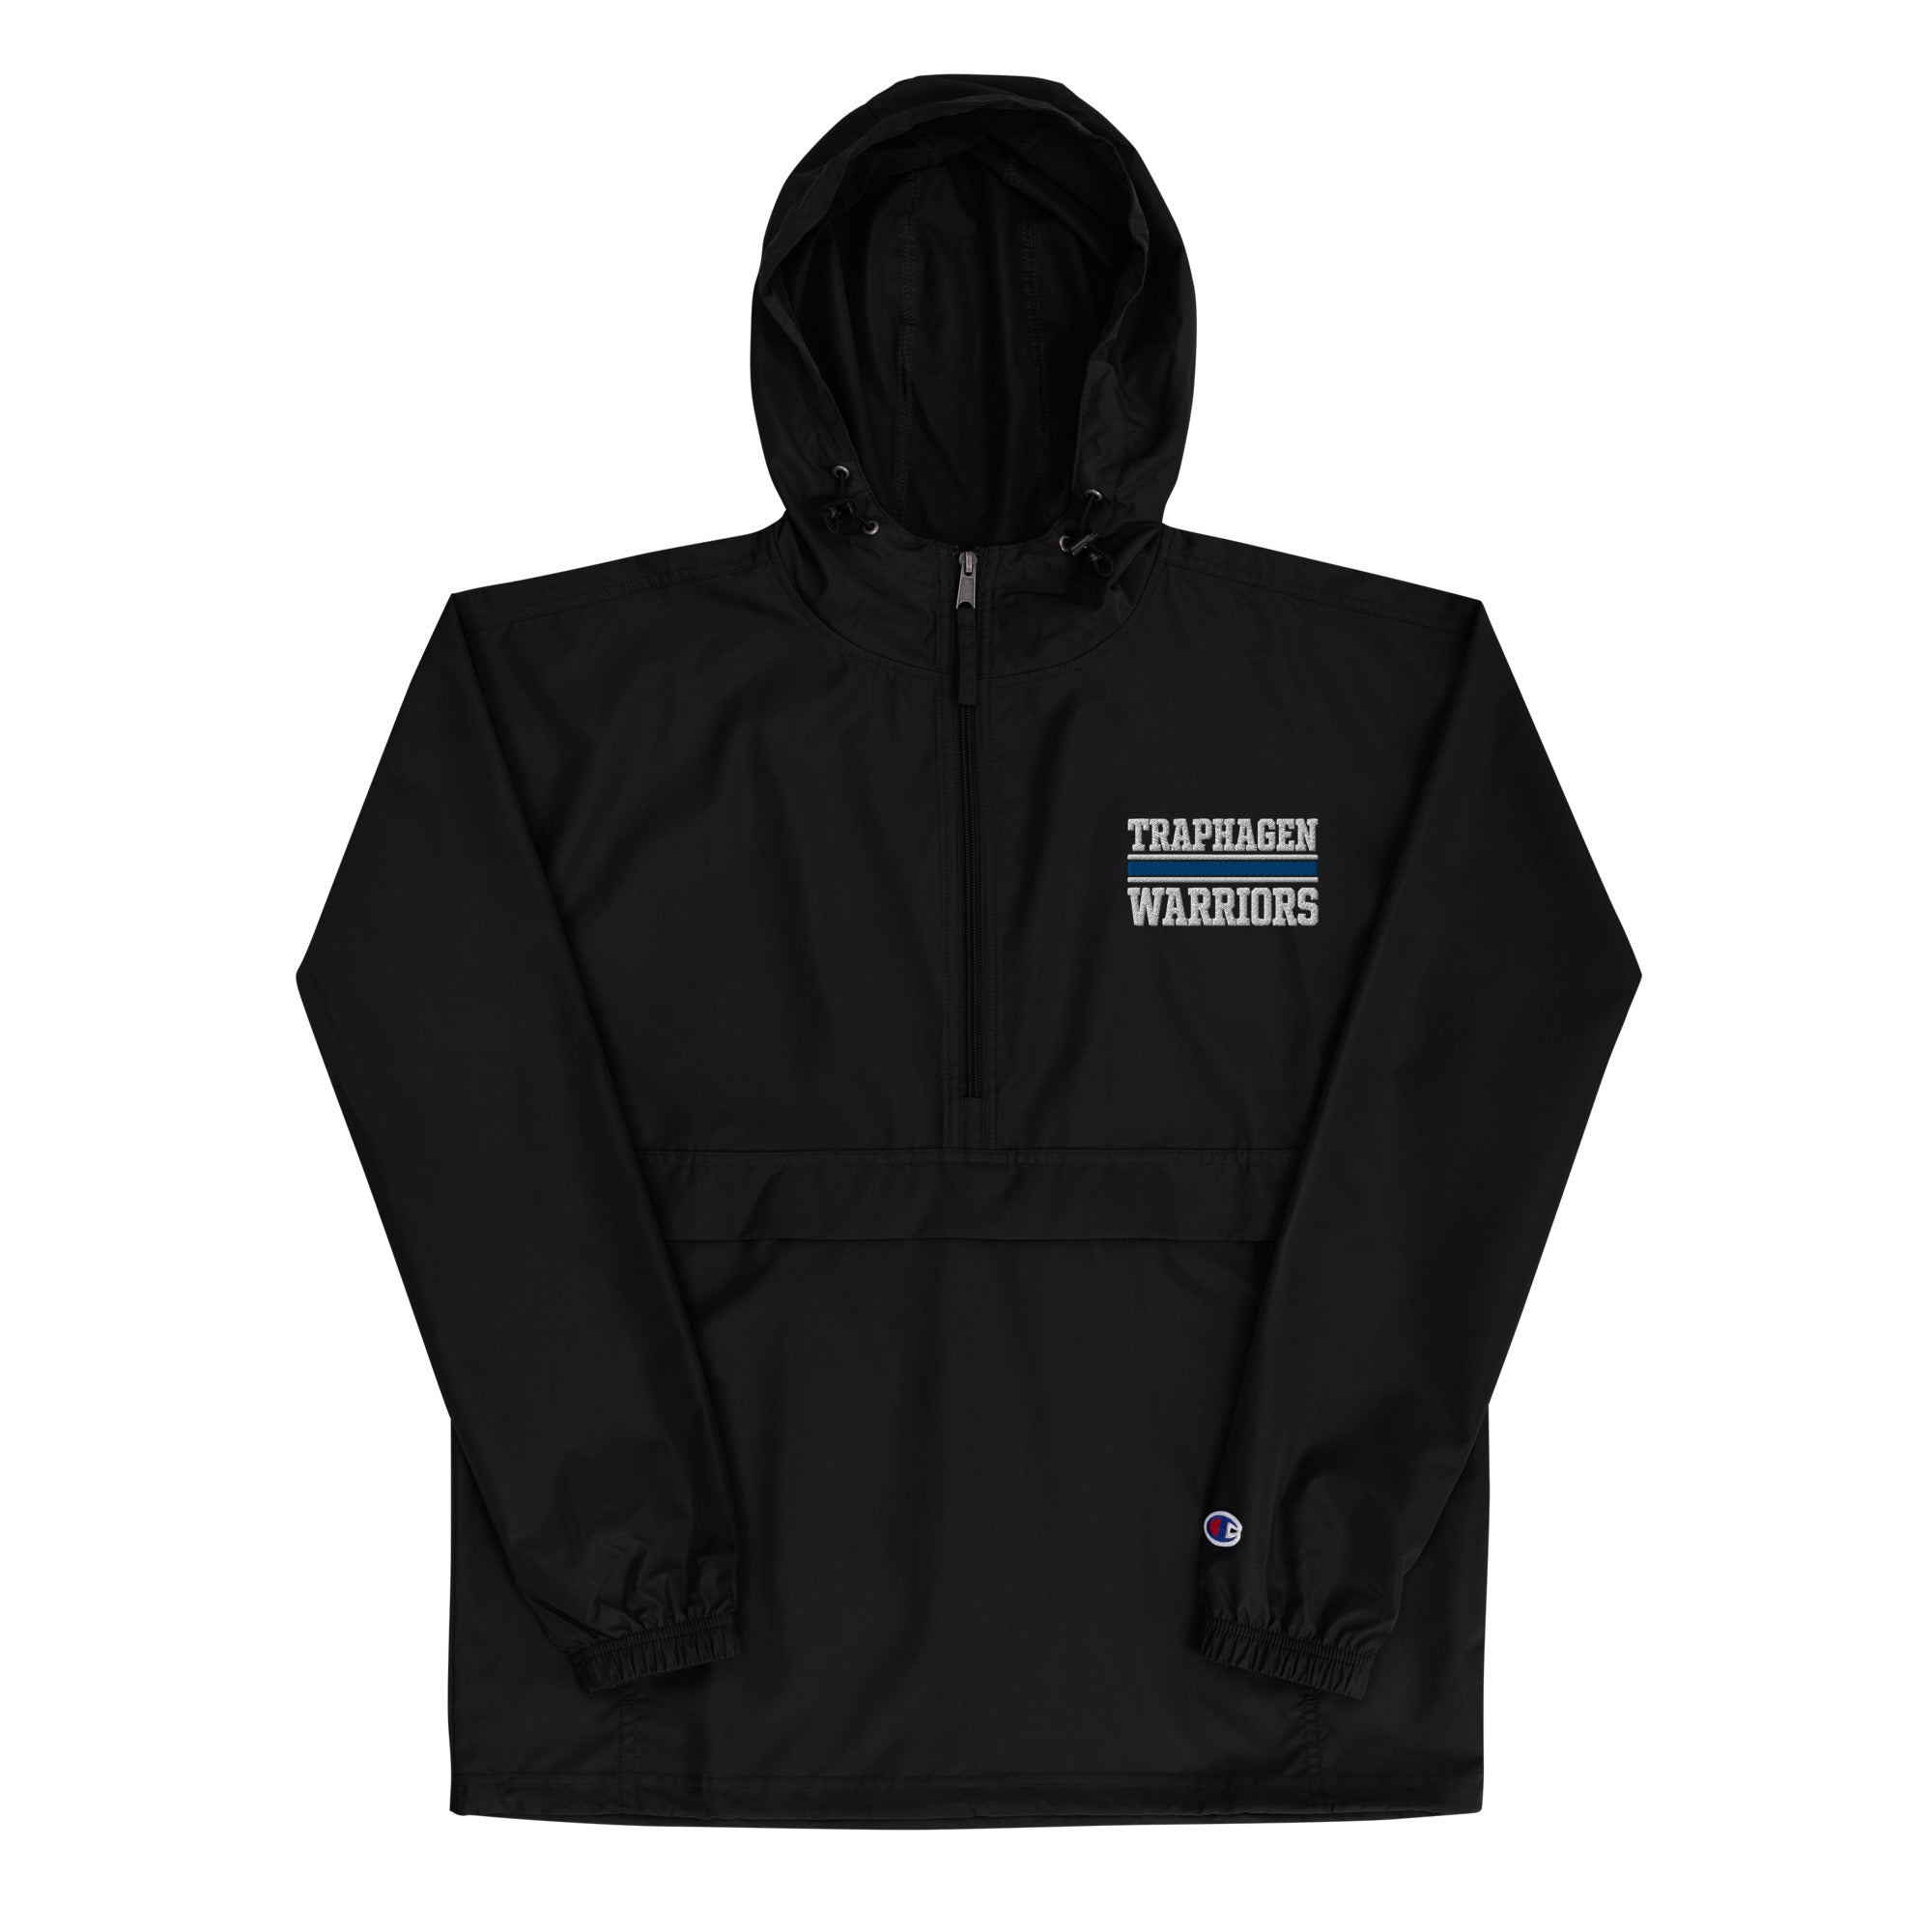 Traphagen Embroidered Champion Packable Jacket